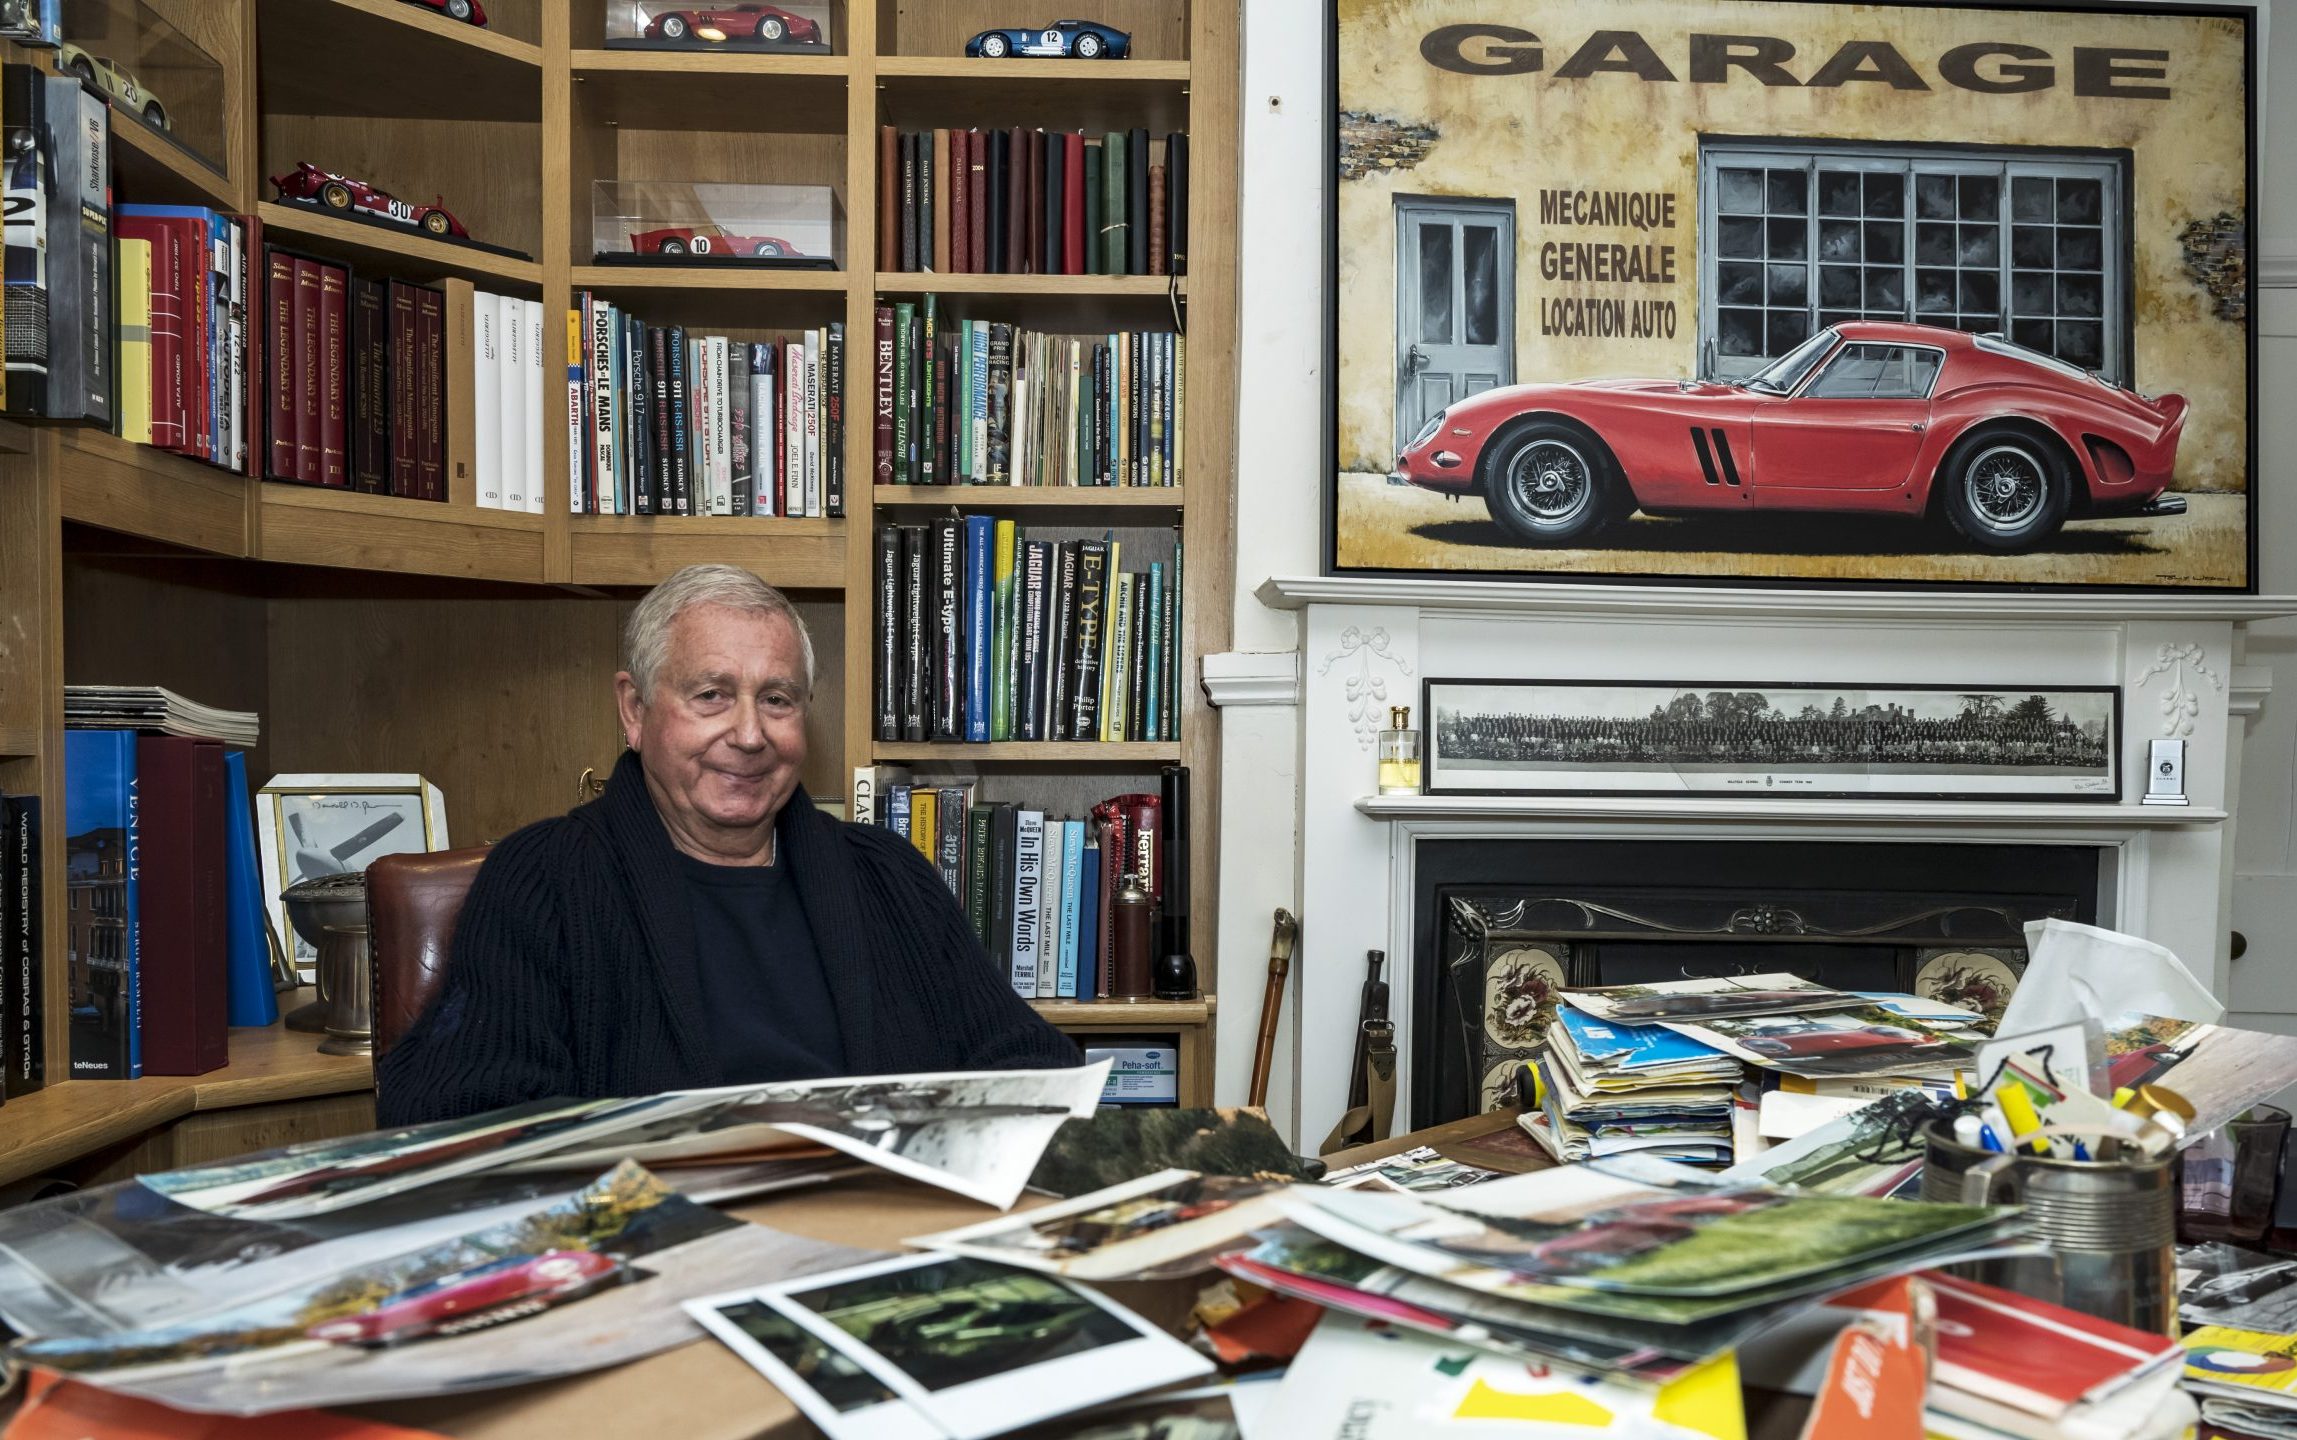 Wheeling and dealing in the fastlane: 'You couldn't sell a Ferrari 250 GTO because it was too slow to win races'